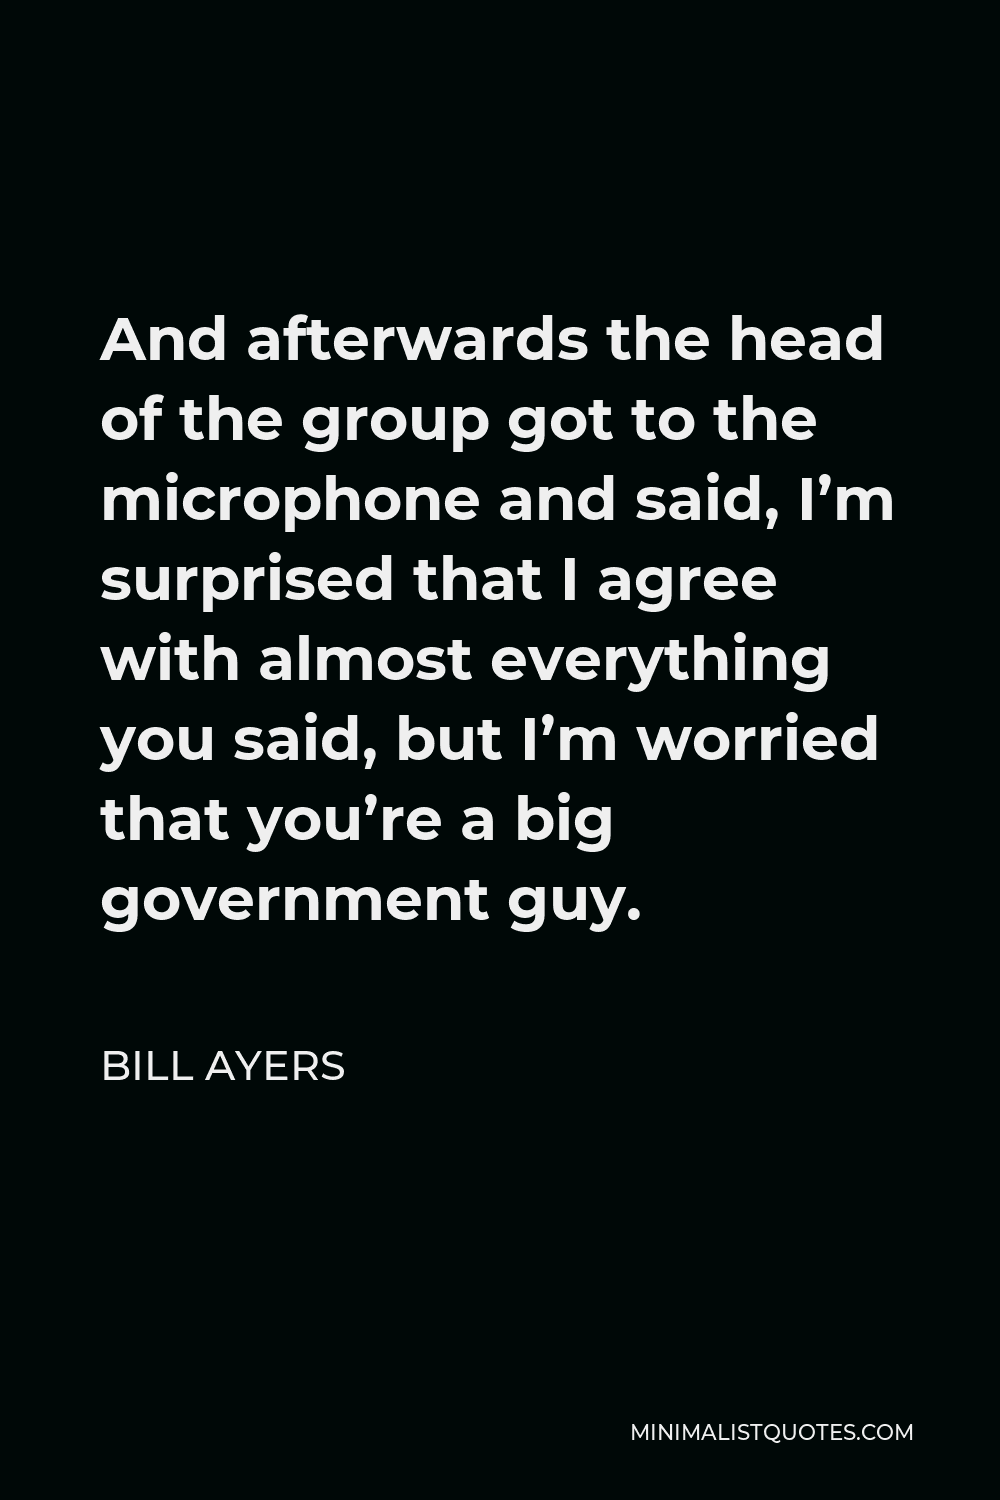 Bill Ayers Quote - And afterwards the head of the group got to the microphone and said, I’m surprised that I agree with almost everything you said, but I’m worried that you’re a big government guy.